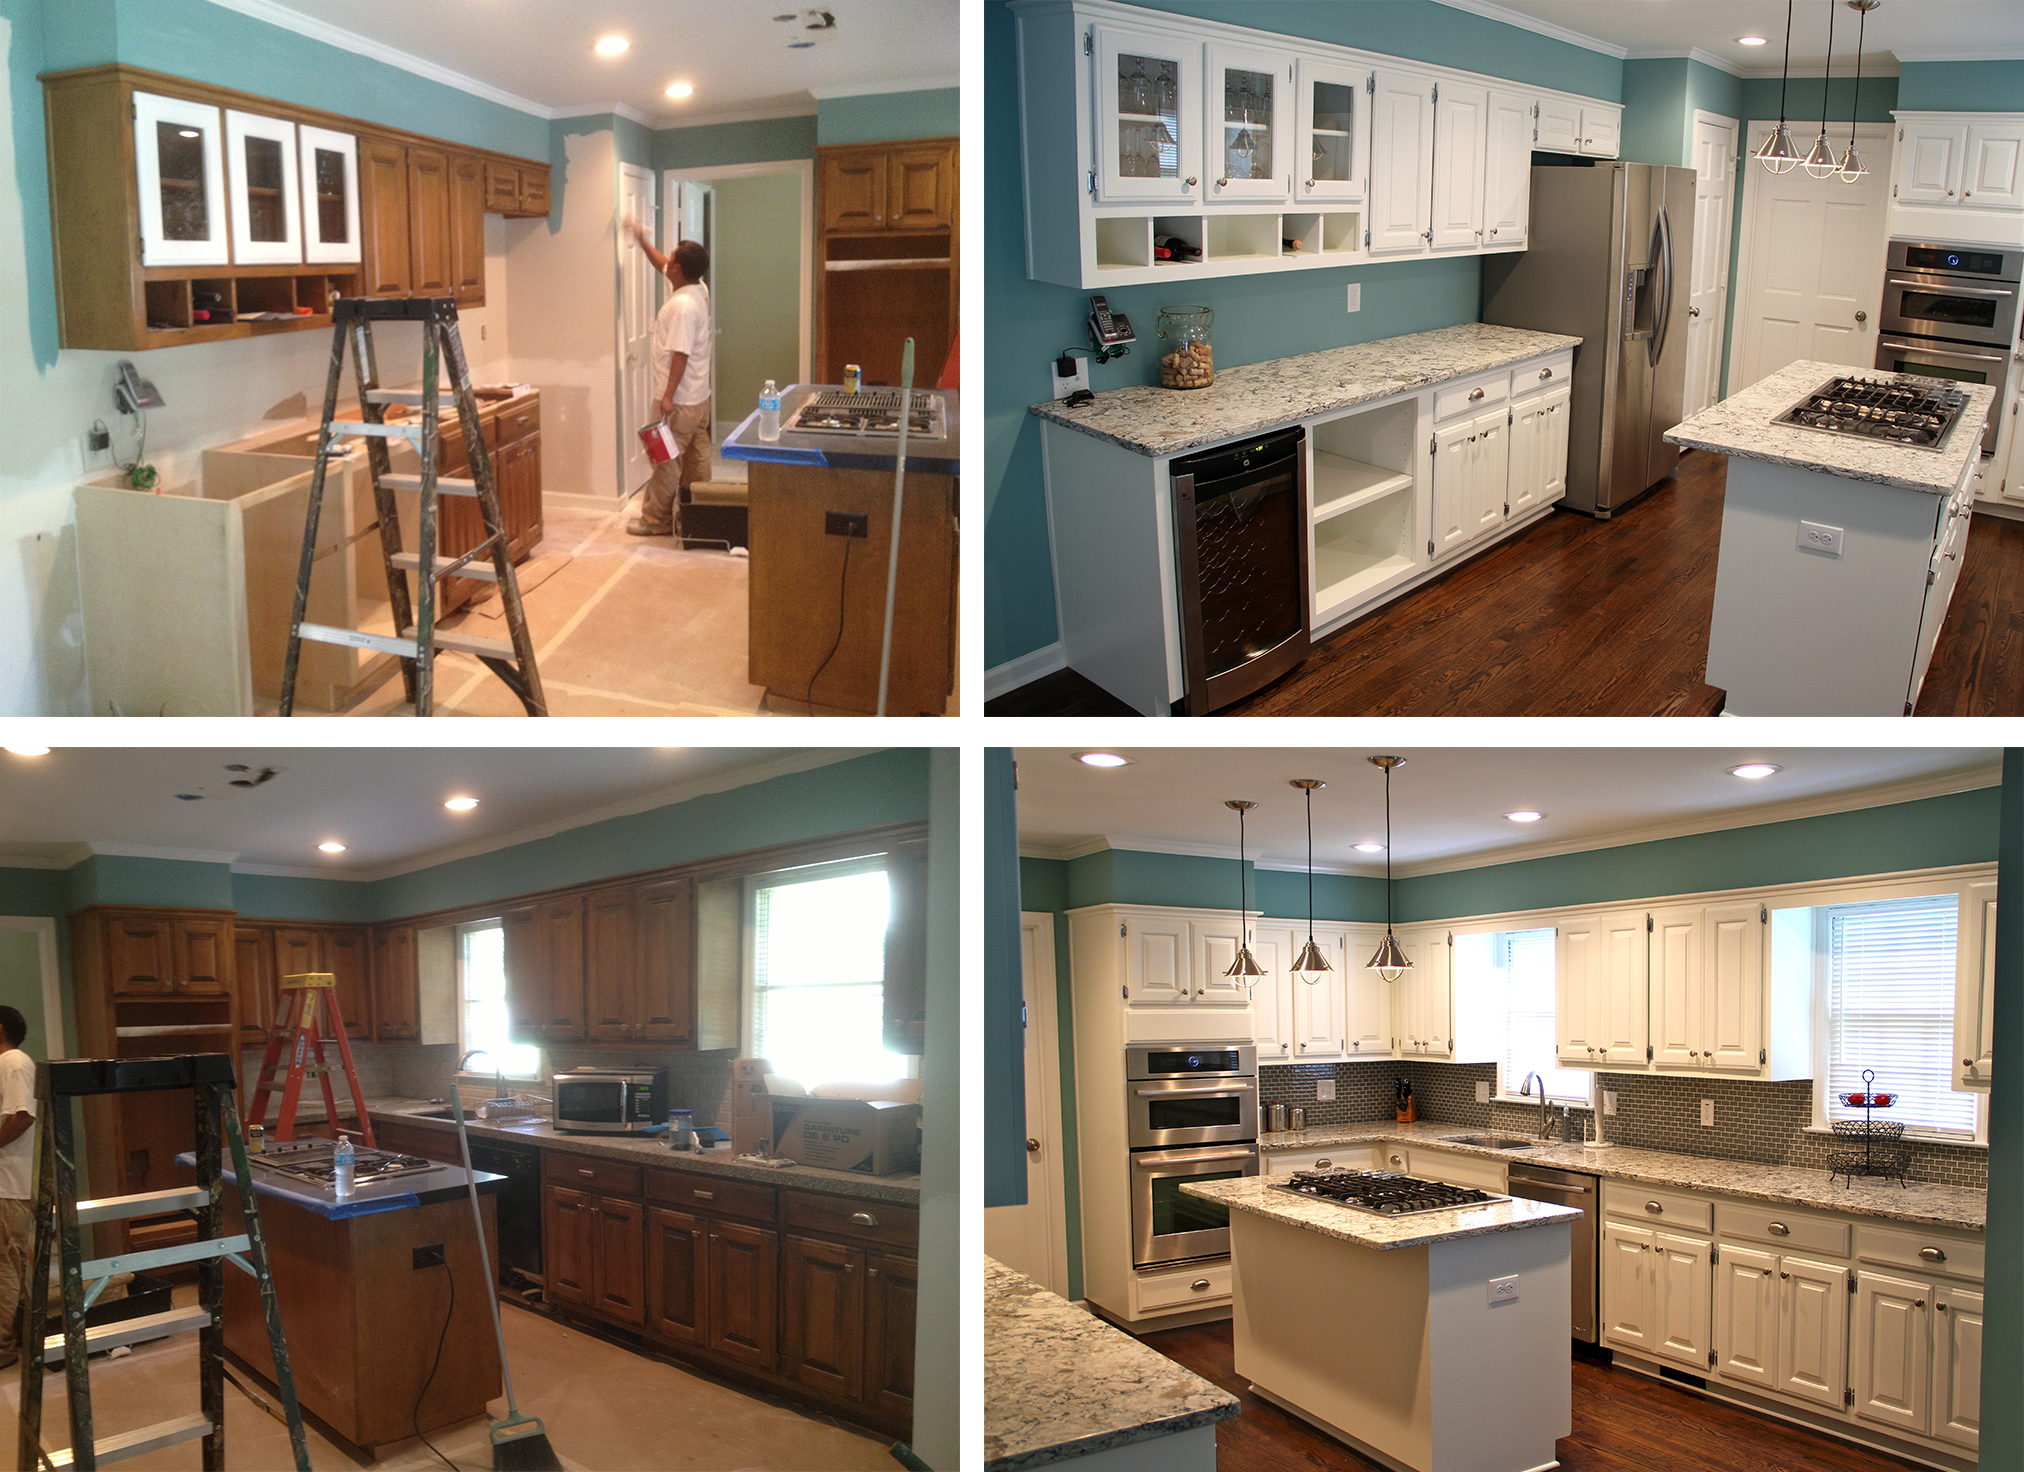 Teal walls and white cabinetry